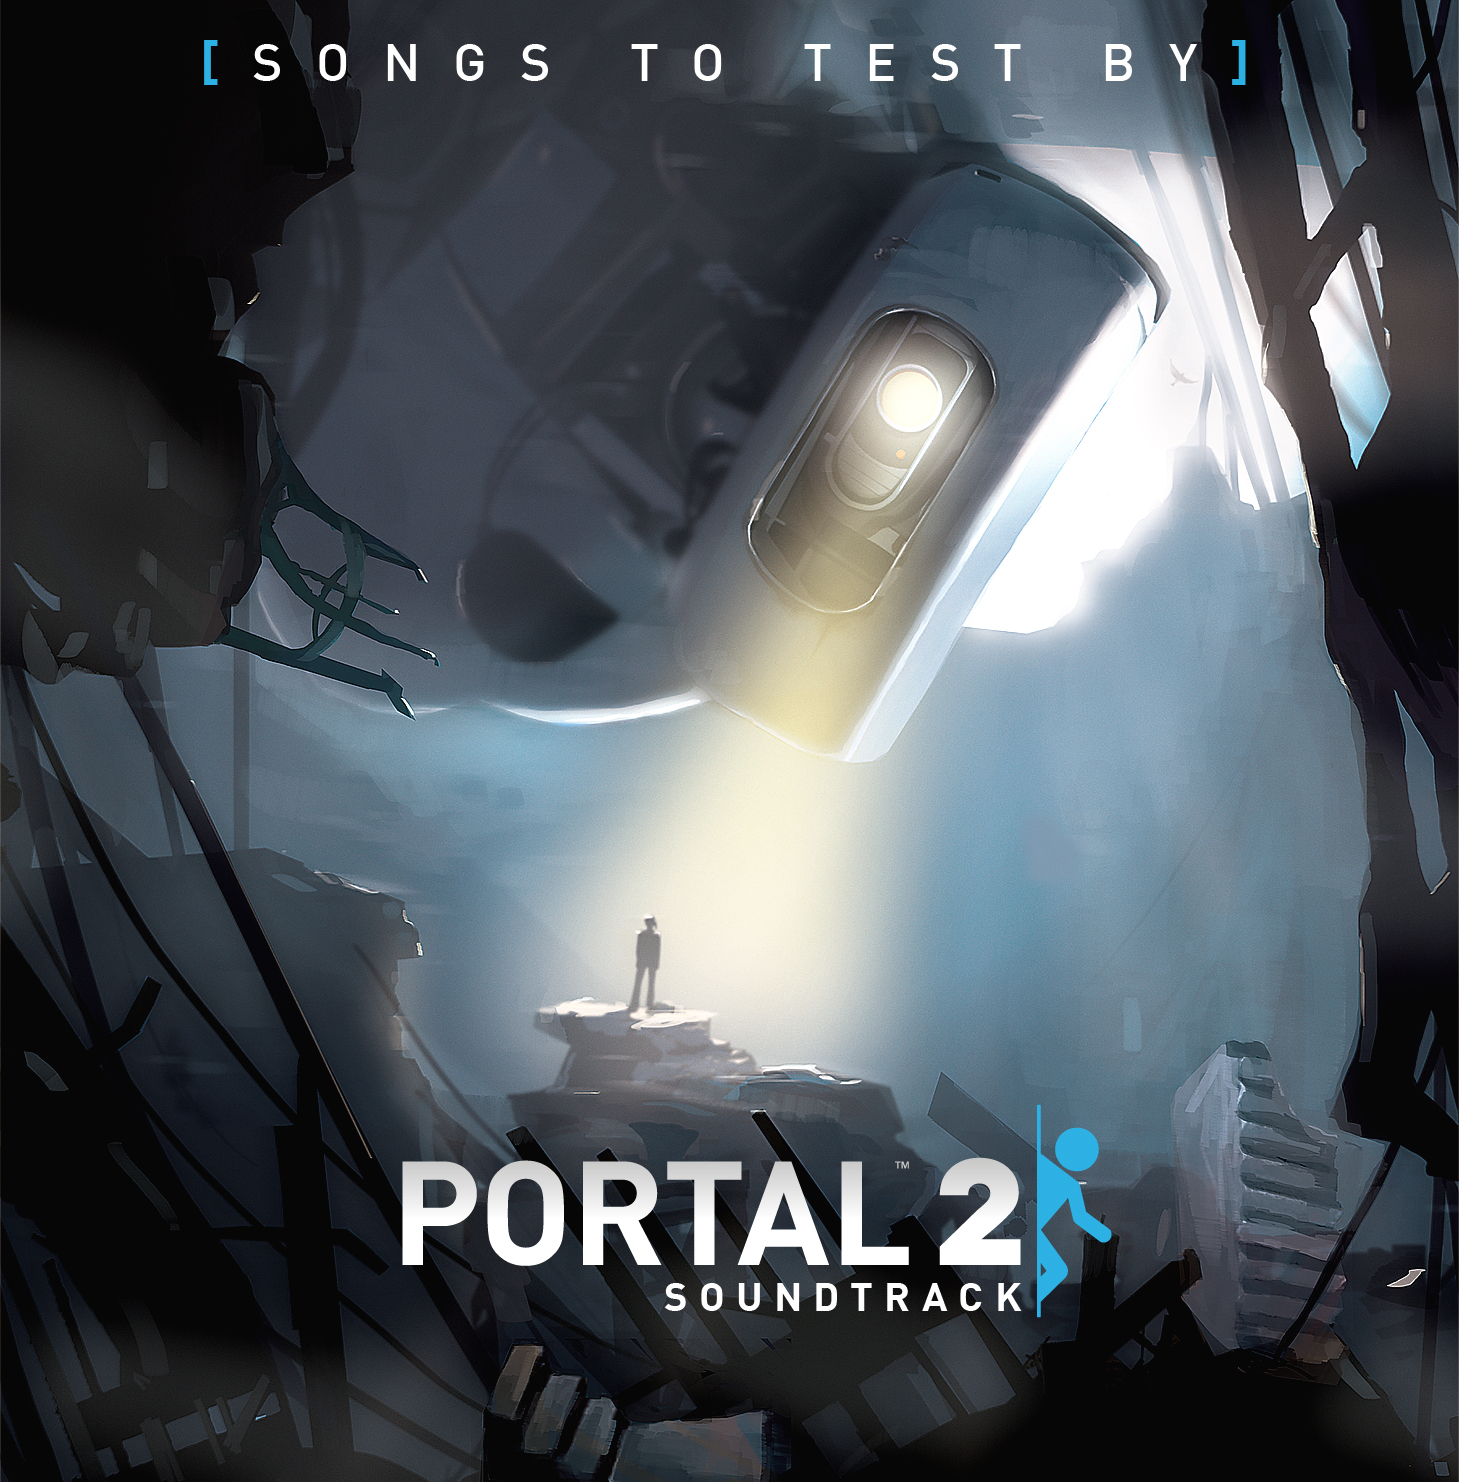 Music from portal 2